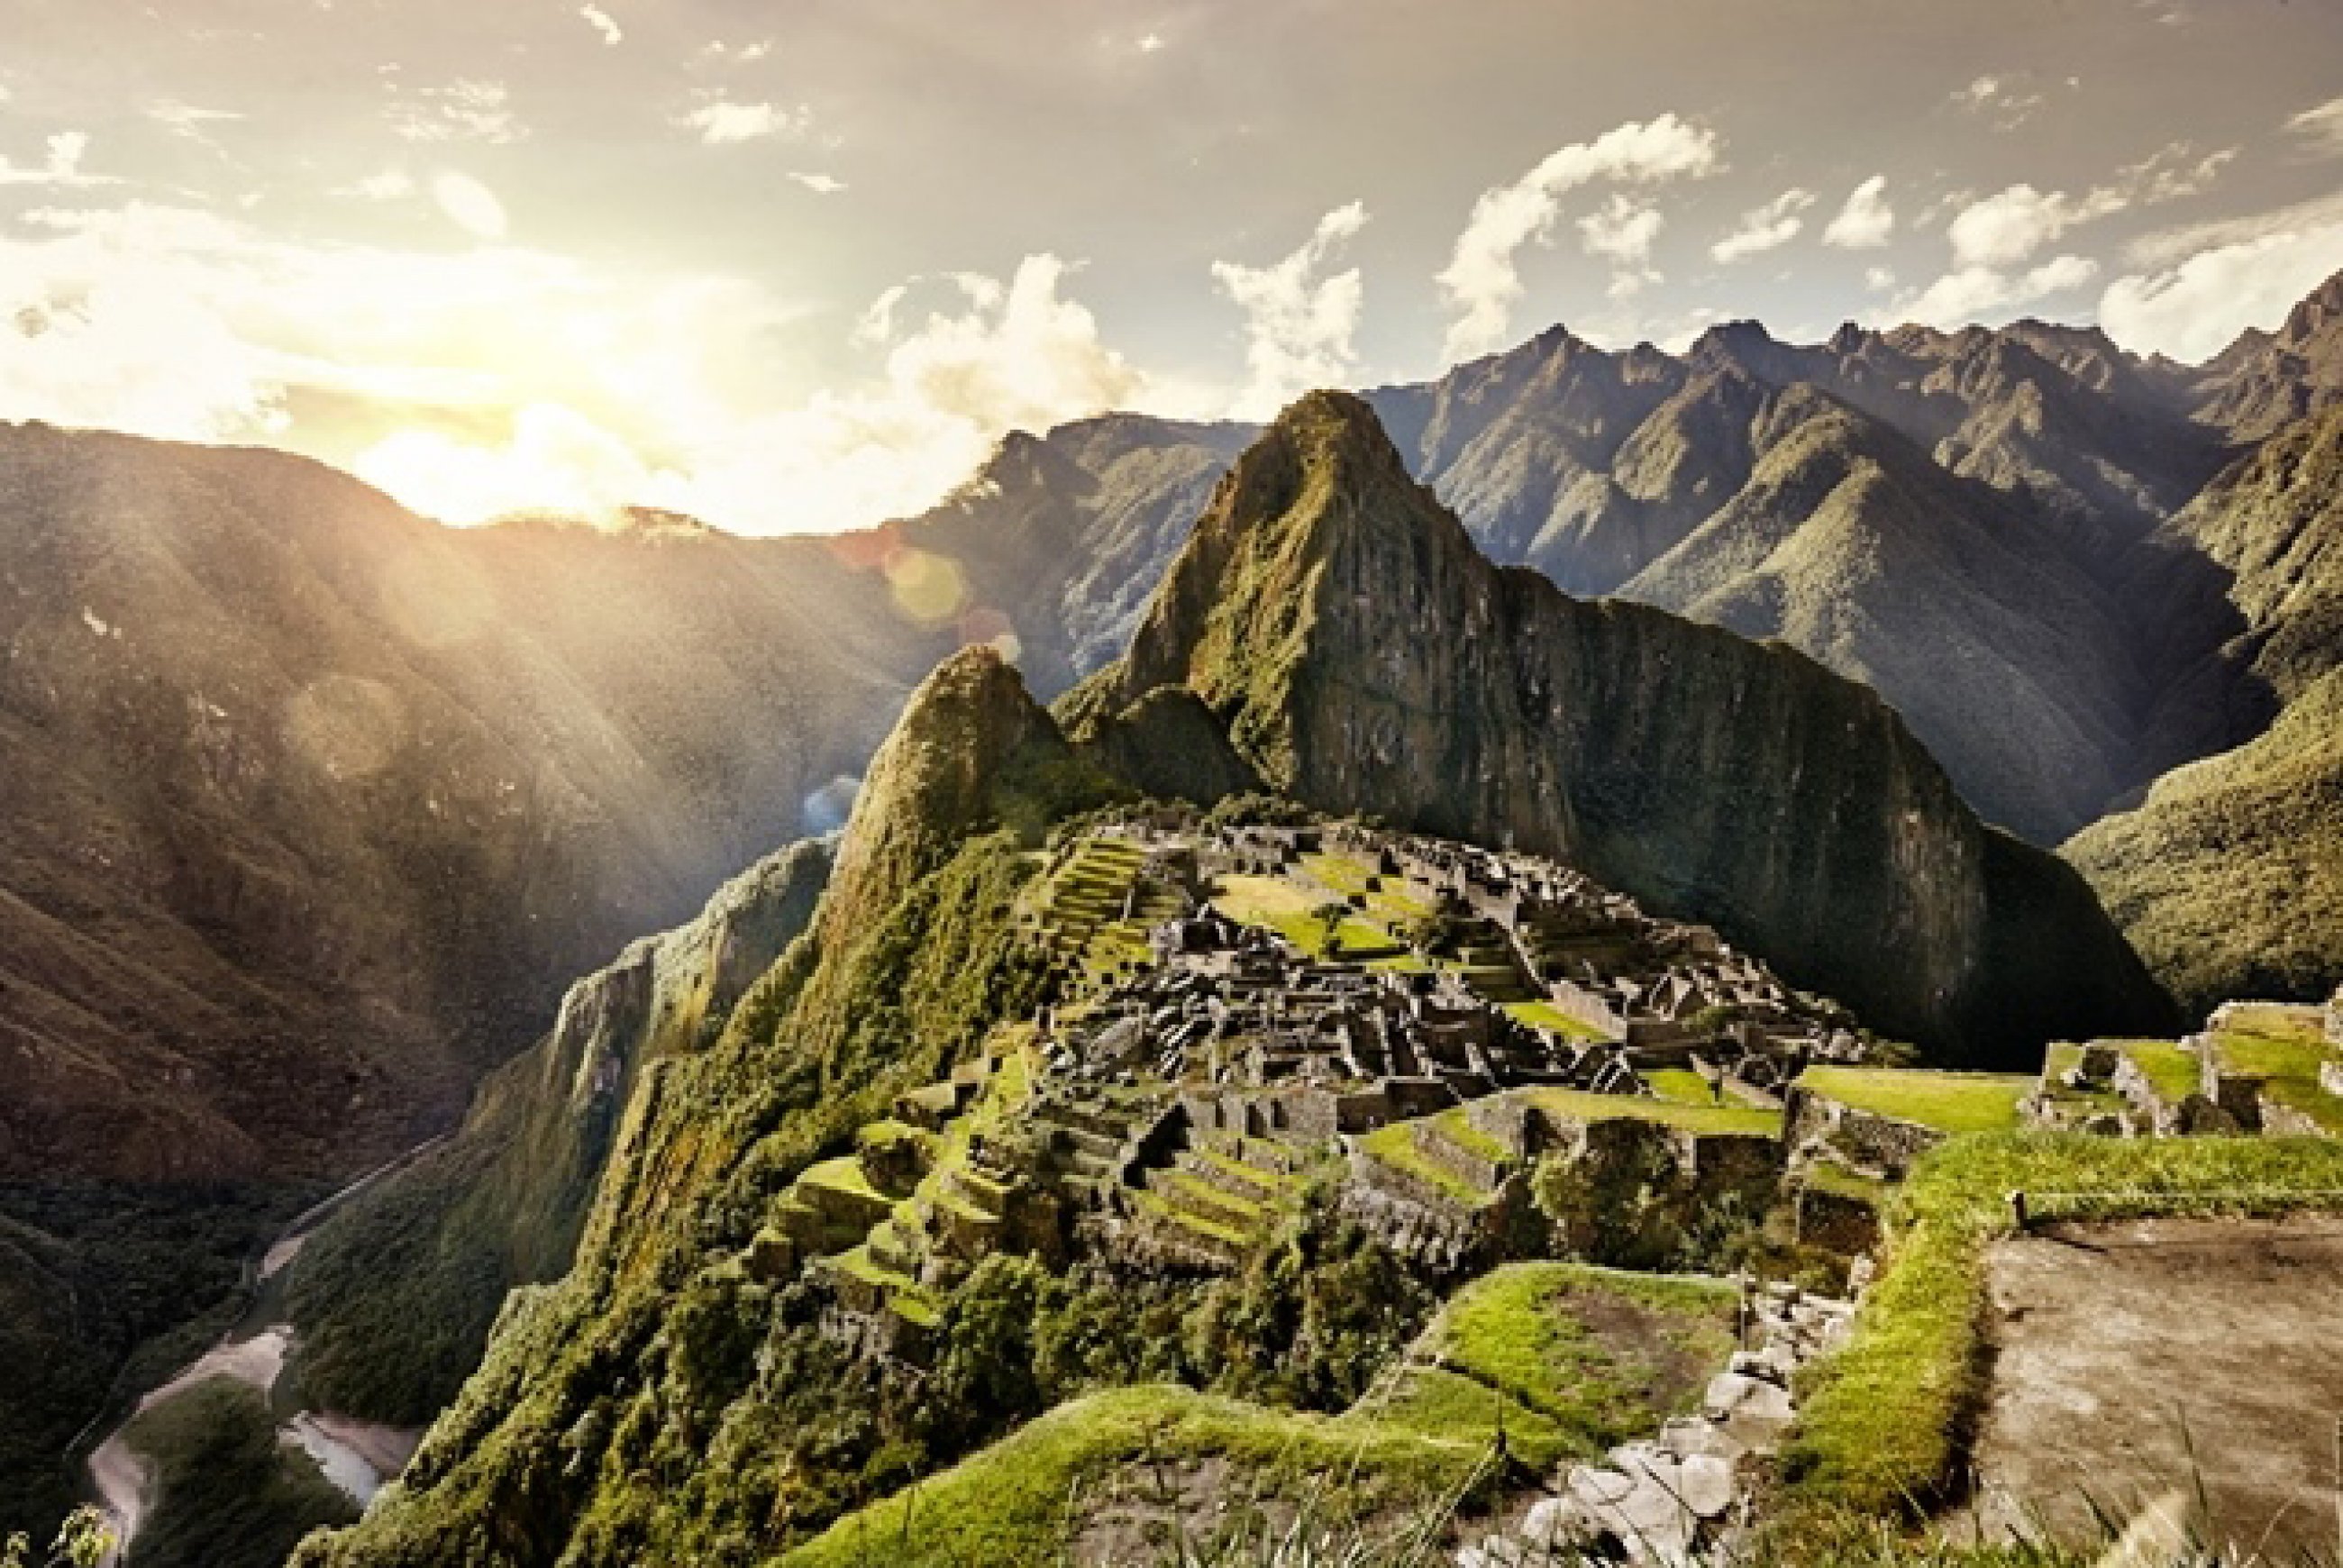 https://bubo.sk/uploads/galleries/7430/view-of-the-ancient-inca-city-of-machu-picchu.-the-15-th-century-inca-site.-lost-city-of-the-incas-.-ruins-of-the-machu-picchu-sanctuary.-unesco-world-heritage-site.jpg